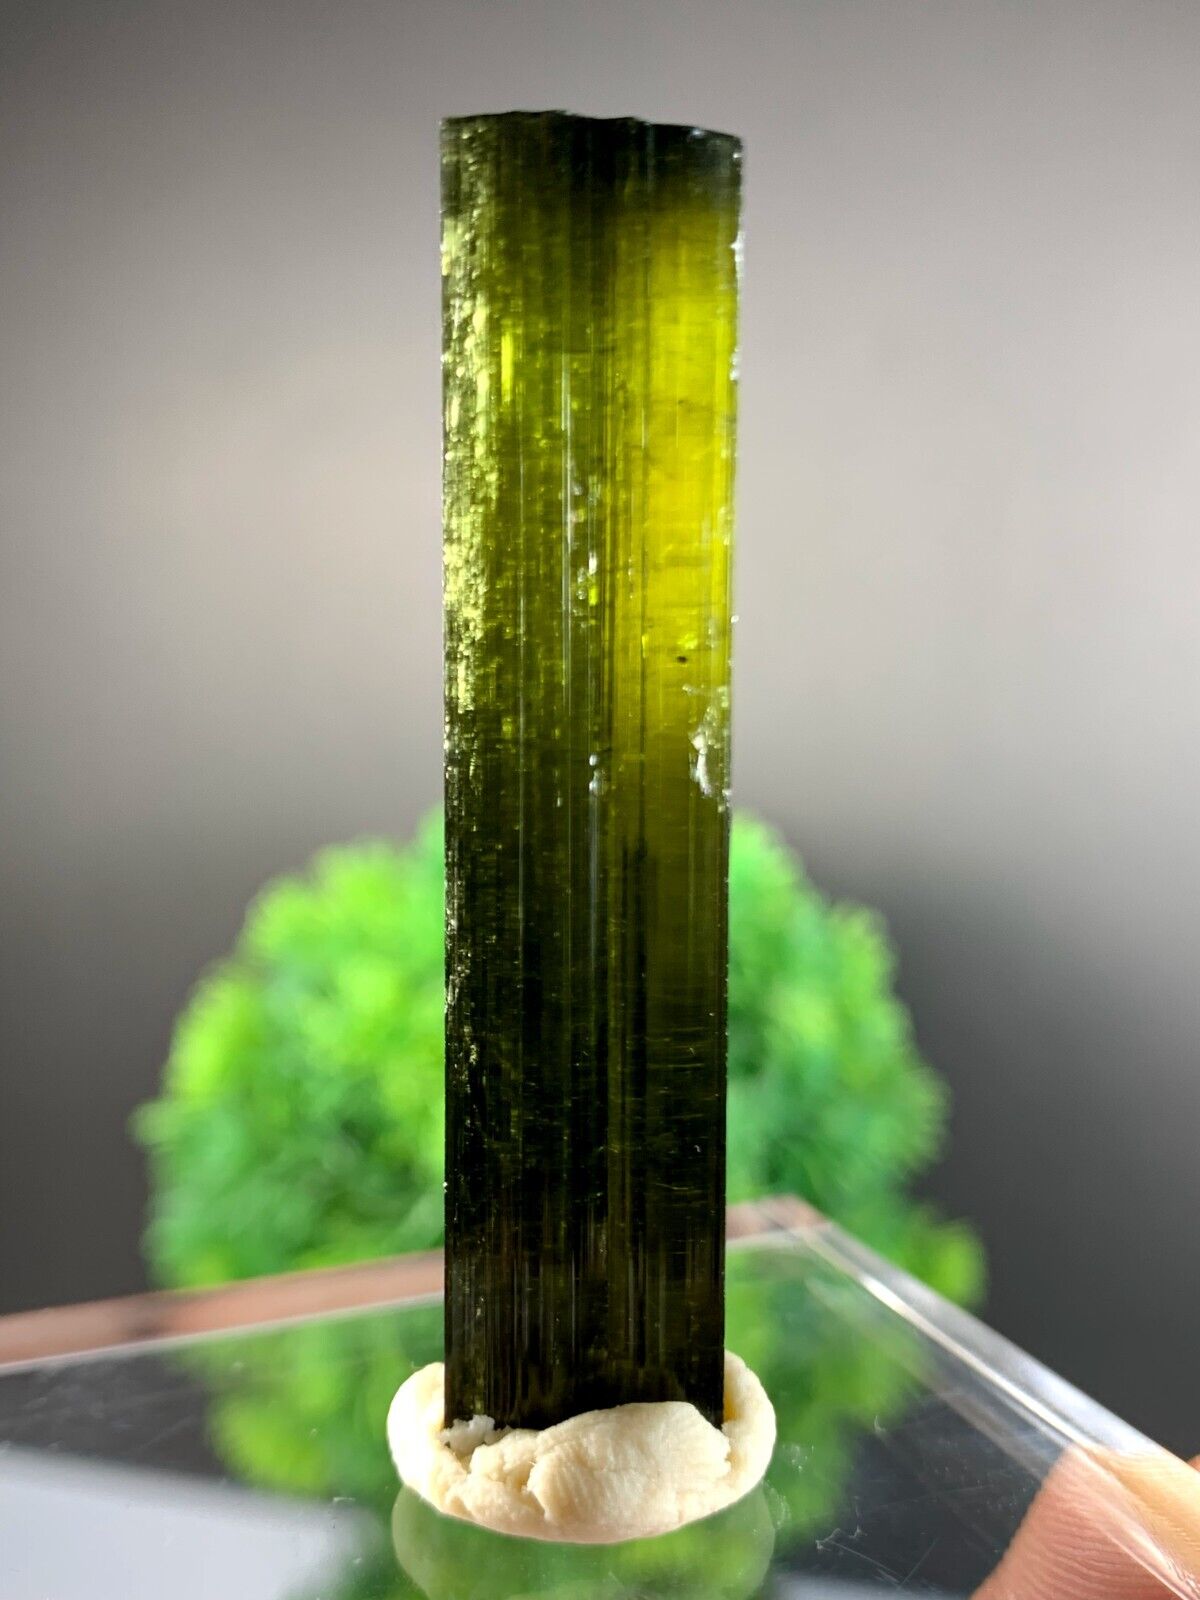 13 Gram Natural Beautiful Green Tourmaline Crystal Specimen From Afghanistan